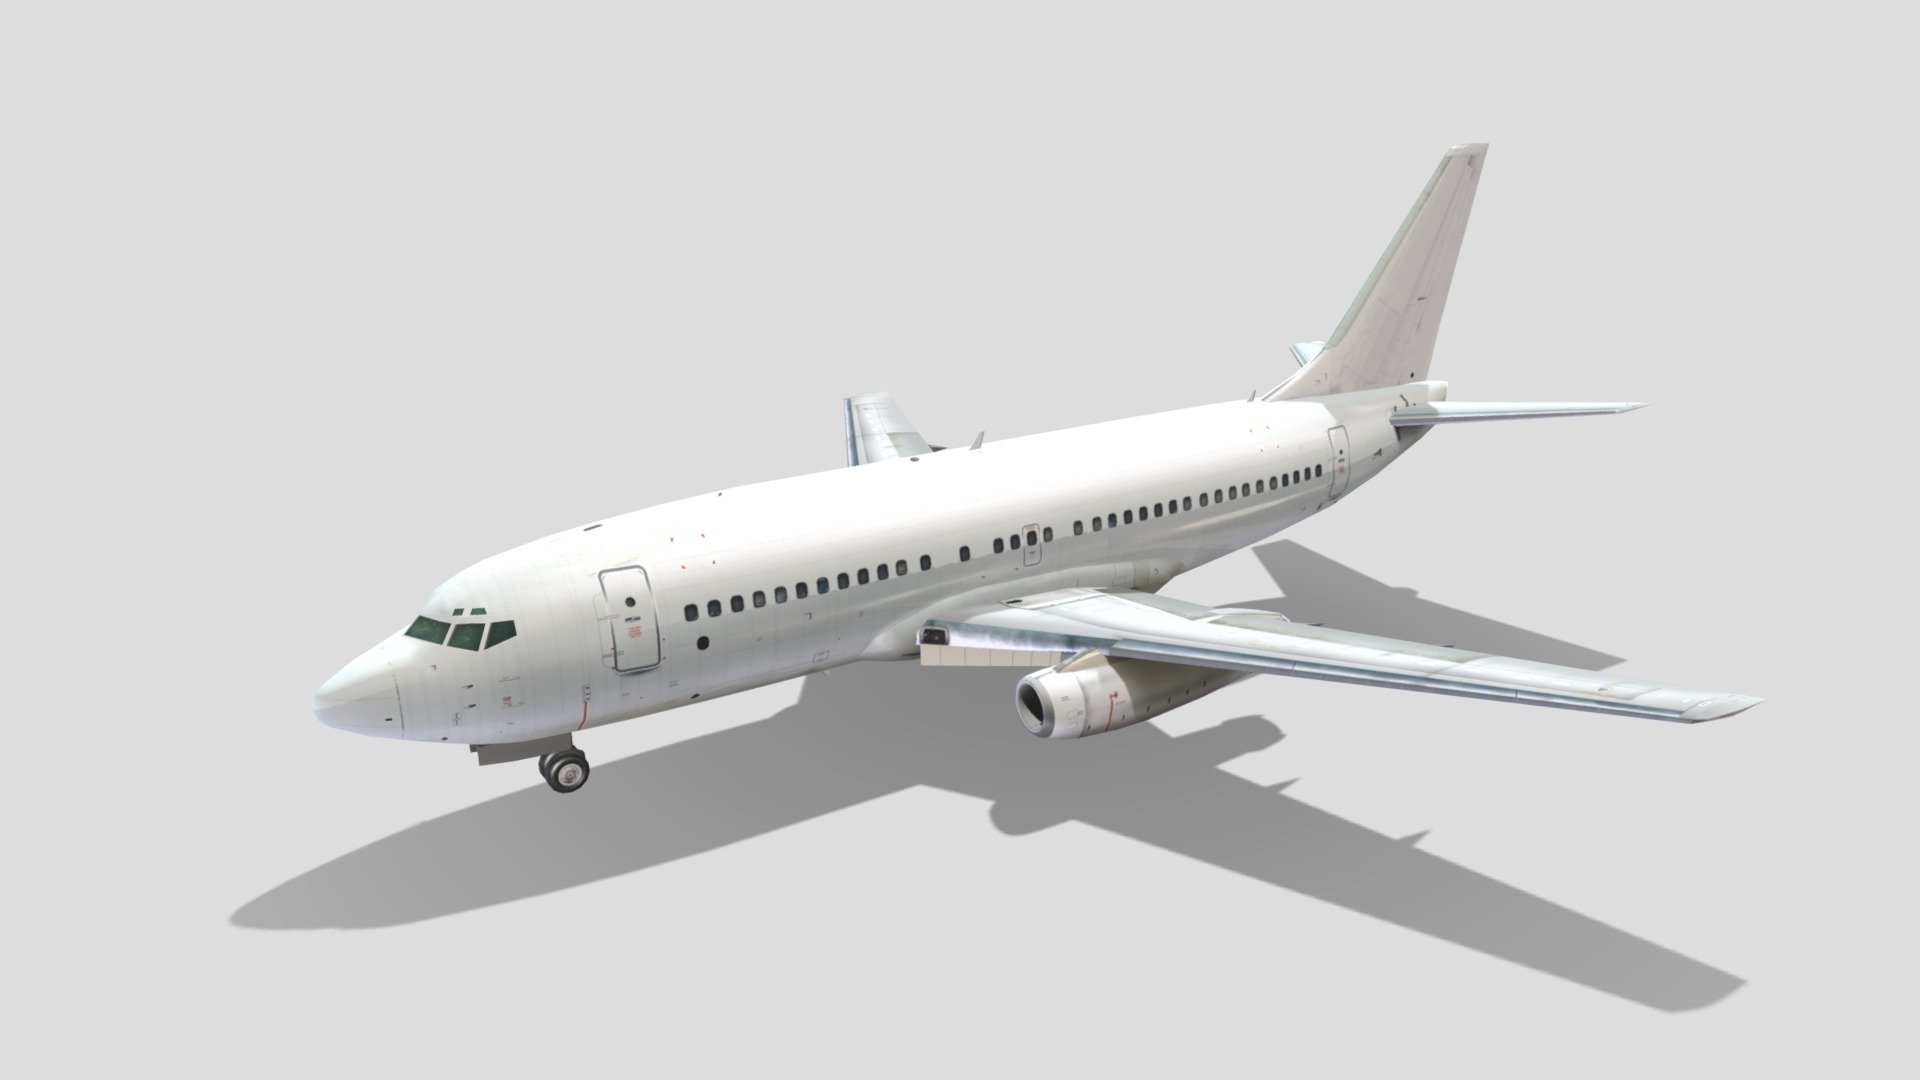 This is a 3D low-poly model of a Boeing 737-200, optimized for minimal complexity with less than 5000 polygons. Despite its low polygon count, the model accurately captures the iconic design and aerodynamic features of the Boeing 737-200, making it ideal for real-time rendering in games or simulations.

The model comes with a blank layered texture, providing a clean slate for customization. This allows you to apply your own color schemes, decals, or airline branding. The layered structure of the texture file offers flexibility in modifying different parts of the aircraft separately, such as the fuselage, wings, engines, and tail.

In summary, this Boeing 737-200 low-poly model is a perfect blend of simplicity, accuracy, and customizability, making it a versatile asset for any 3D project.

This model is available in Sketchfab, CGTrader and Turbosquid, thanks for looking! dont forget to check my other models - Boeing 737-200 Classic  B732 Static Lowpoly - Buy Royalty Free 3D model by hangarcerouno 3d model